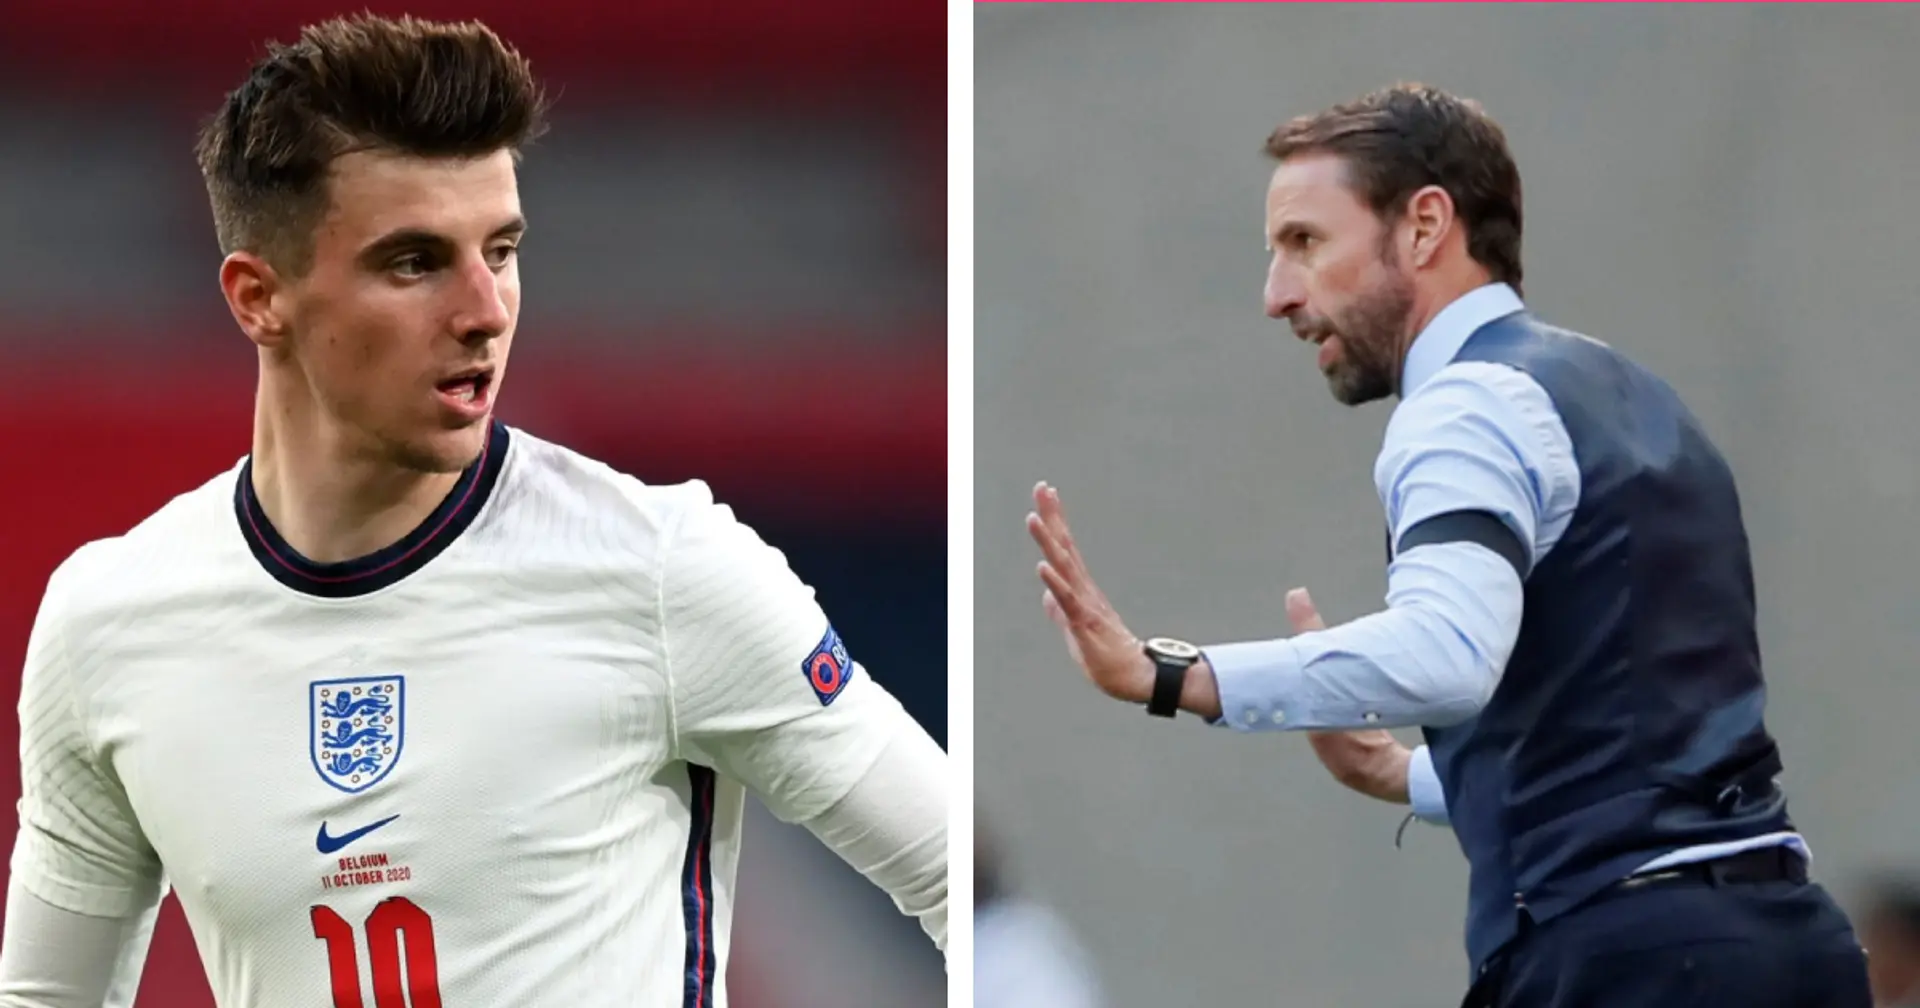 'He can play as 4, 8 or 10': Gareth Southgate explains how 'intelligent' Mason Mount helps England's midfield